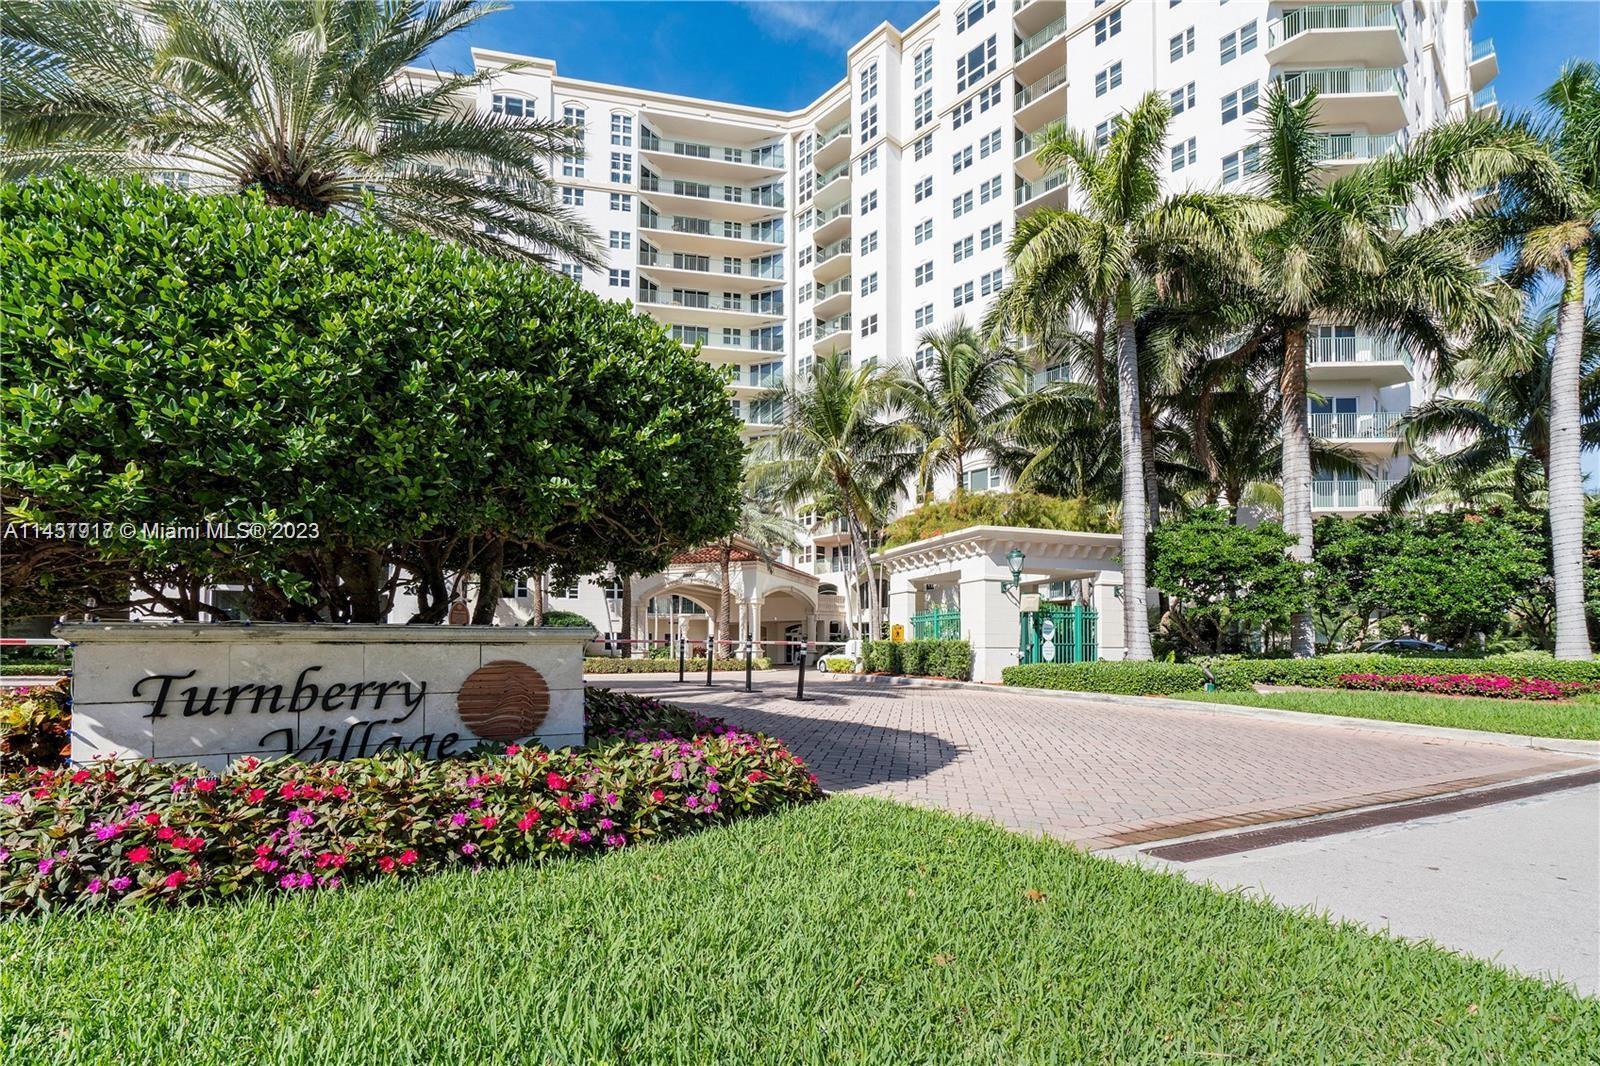 Stuning condo. Excellent Location. Adjacent to the beautiful Turnberry Golf course steps from the wo